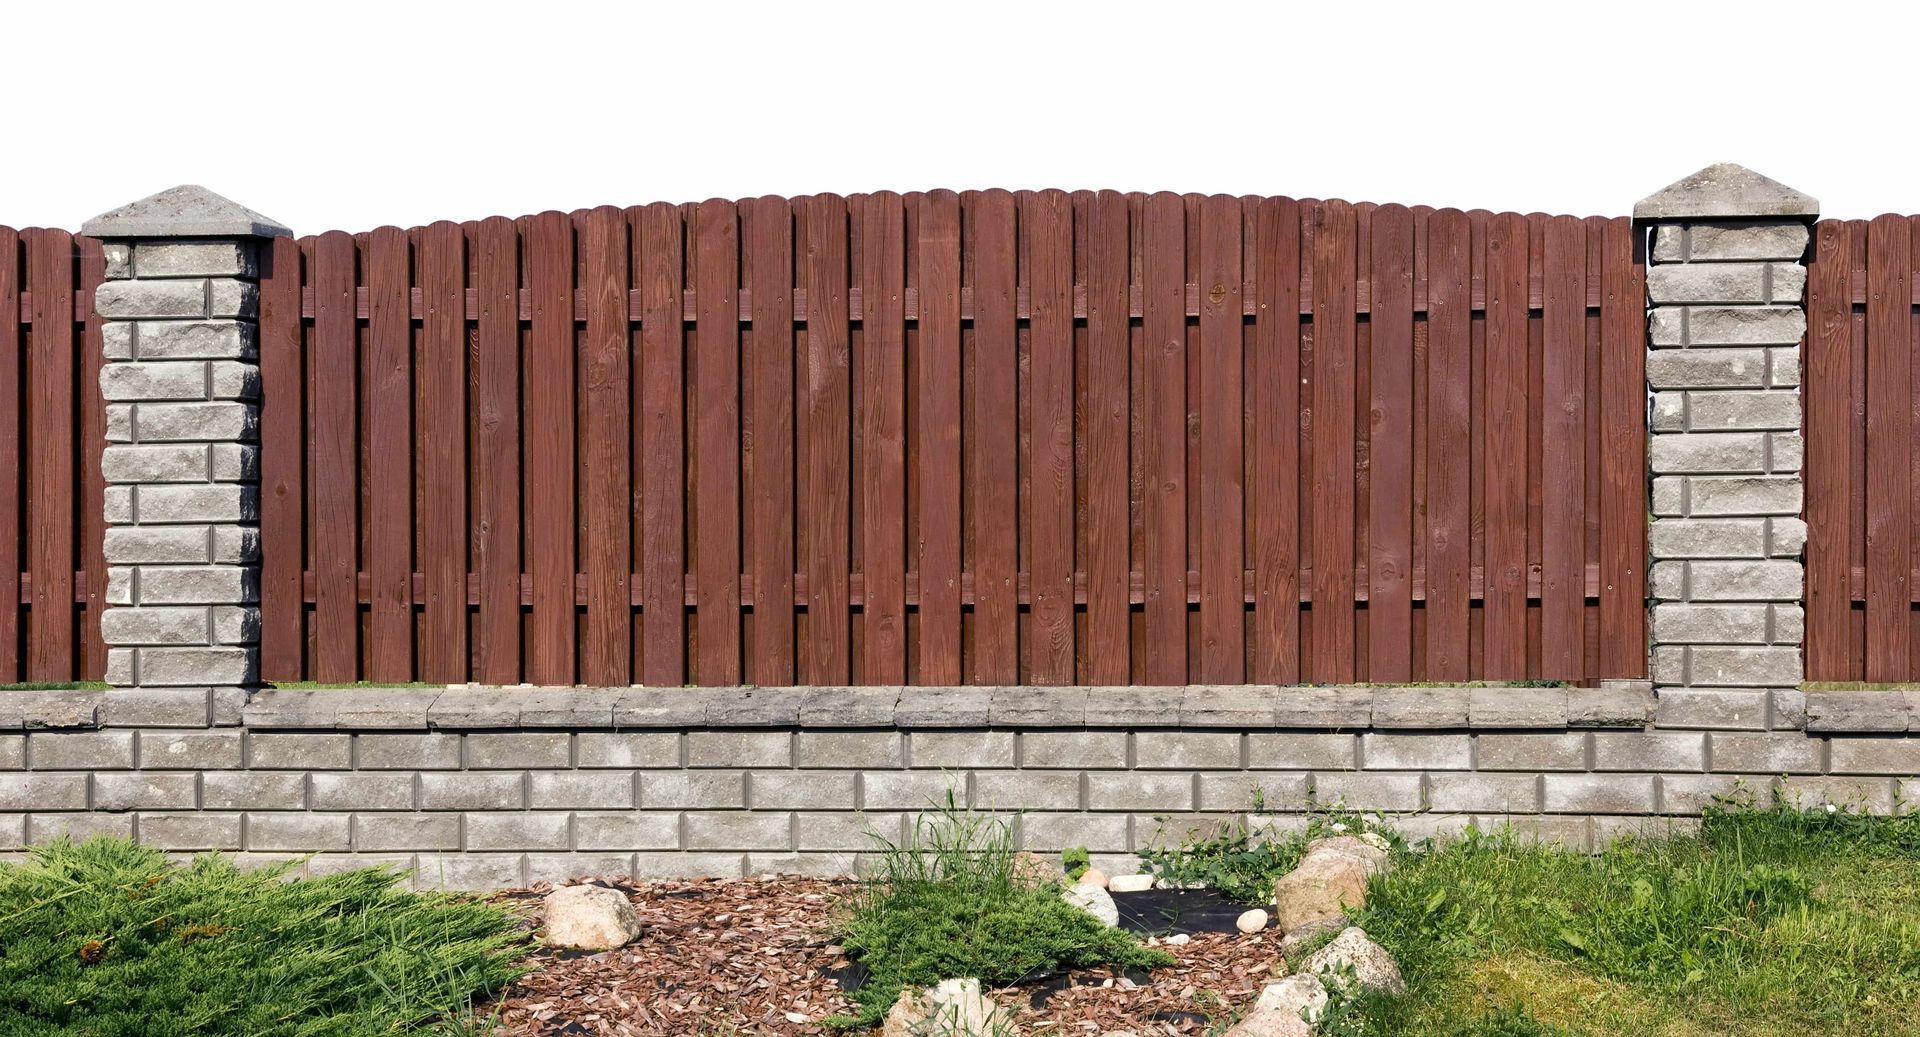 Newly constructed wood fence on bricks